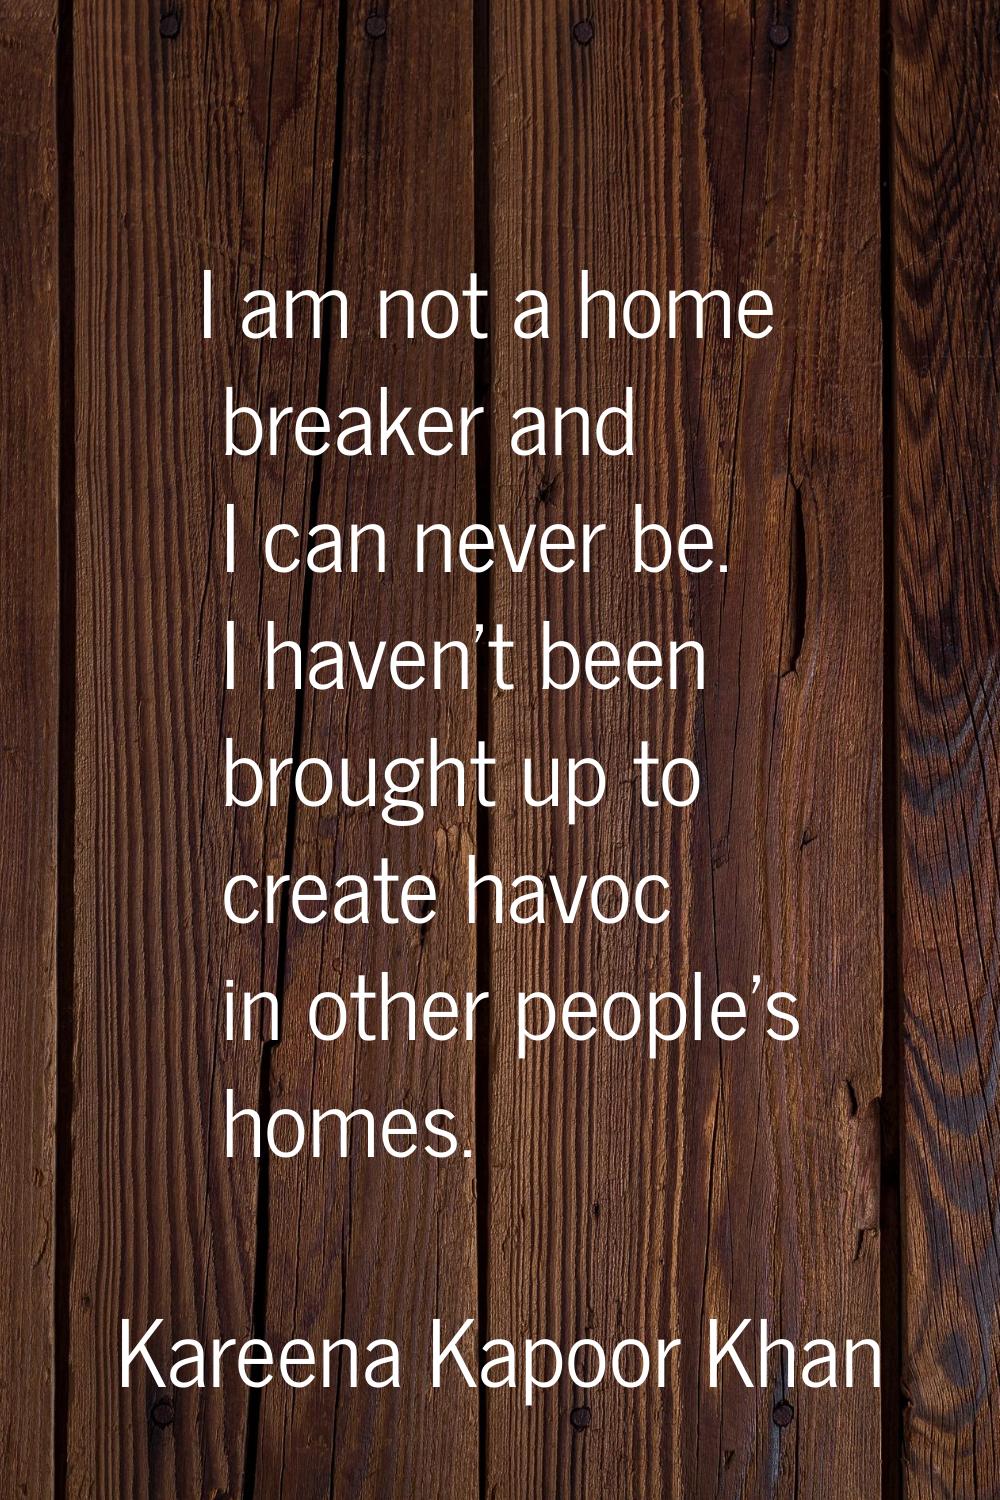 I am not a home breaker and I can never be. I haven't been brought up to create havoc in other peop